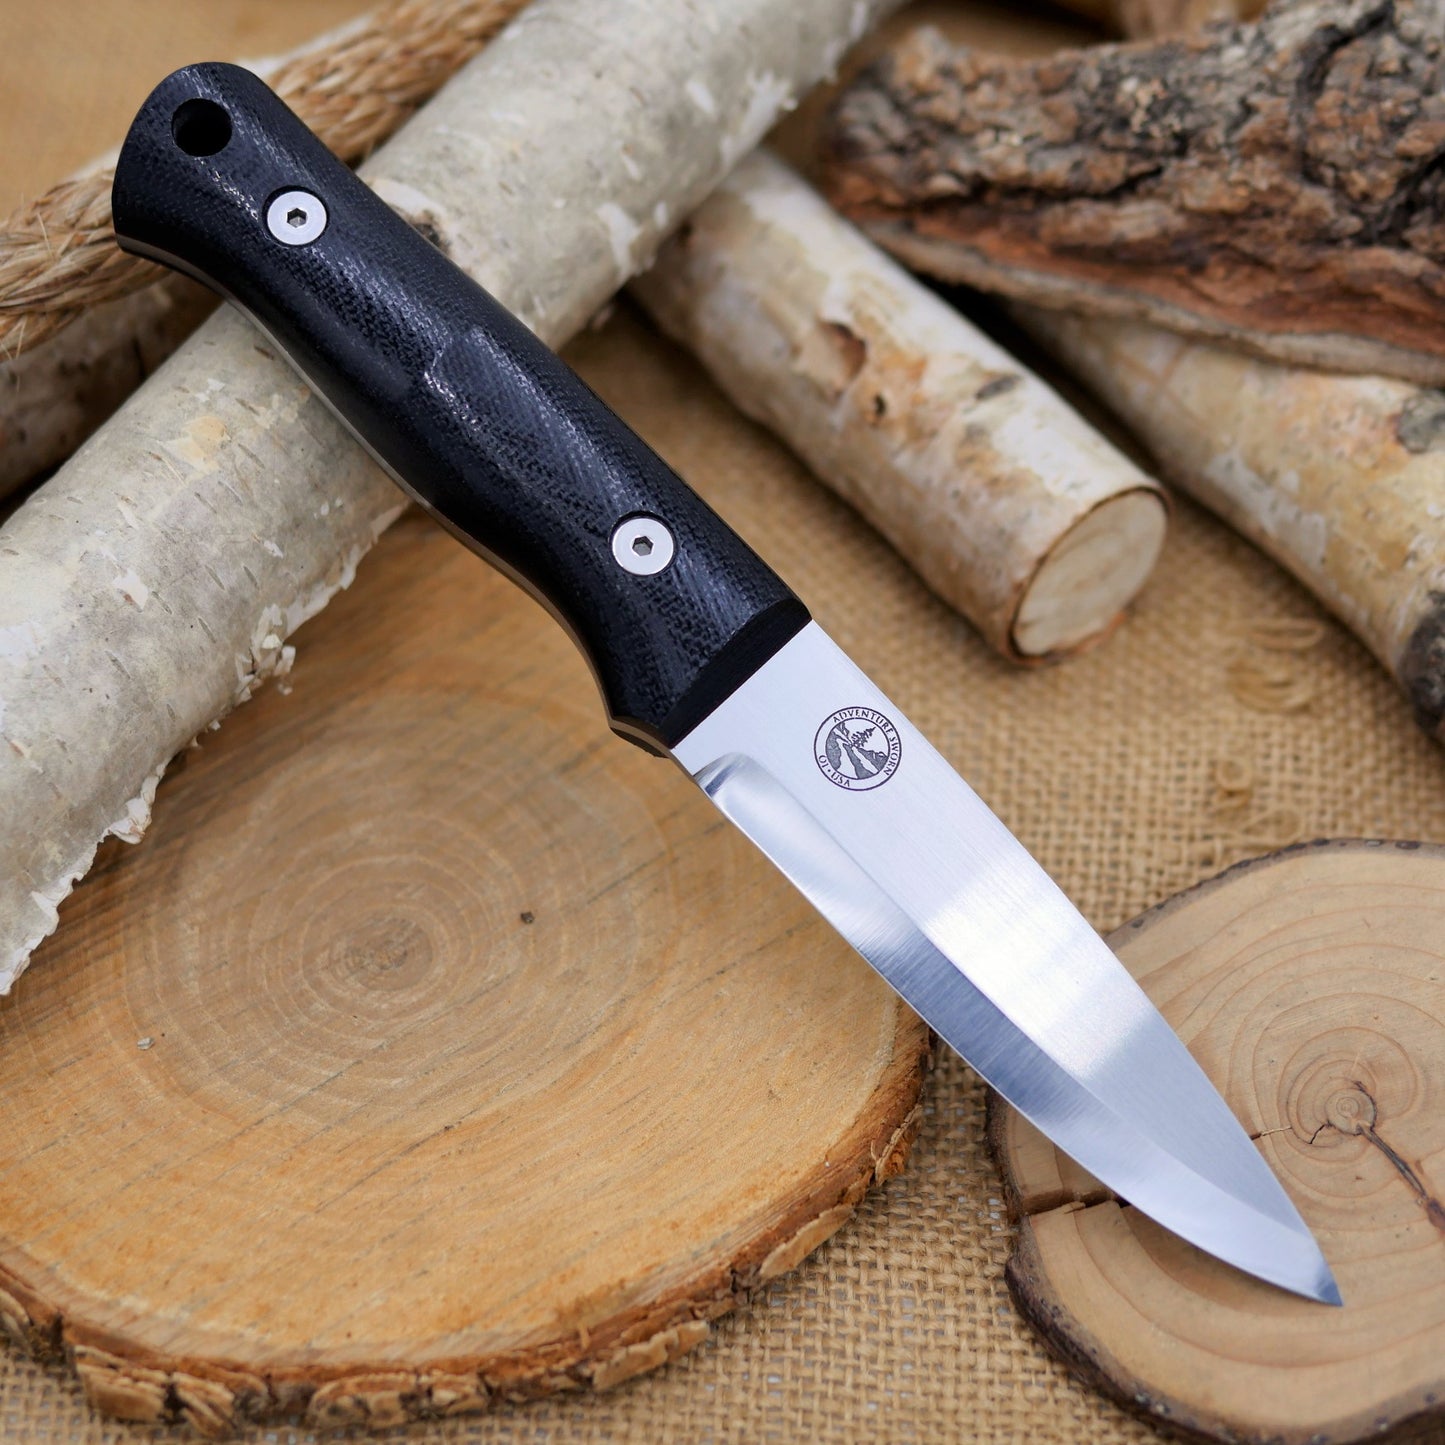 Classic: Black Canvas Micarta, Red G10 Liners